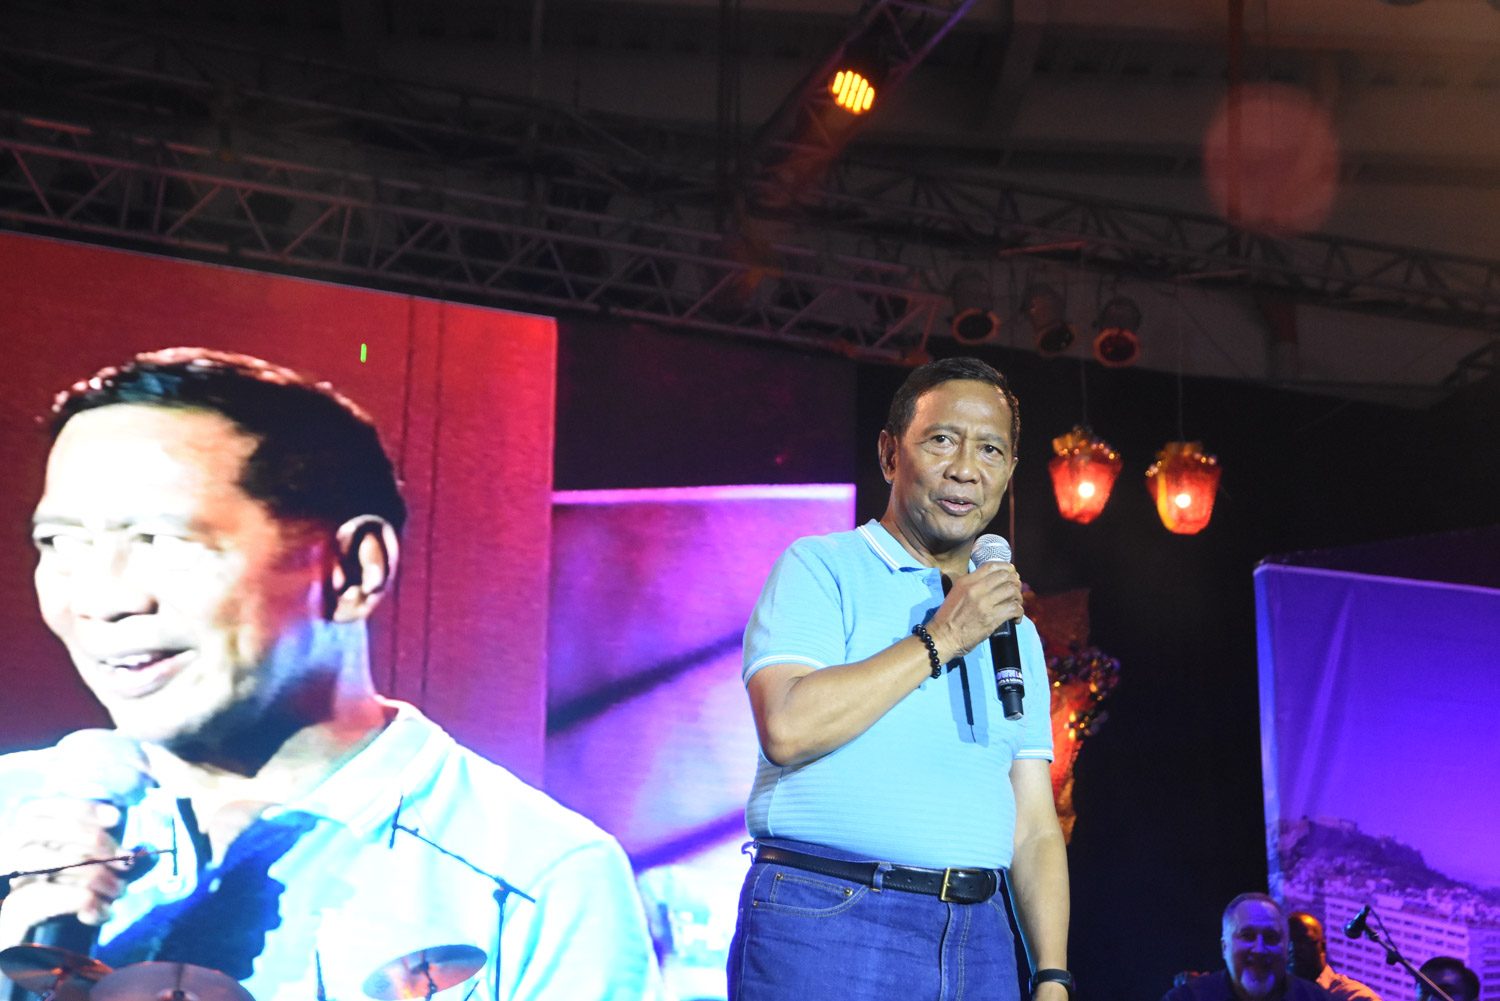 PRAISES. Vice President Jejomar Binay heaps praises on Manny Pacquiao during the latter's birthday party on December 17, 2015 